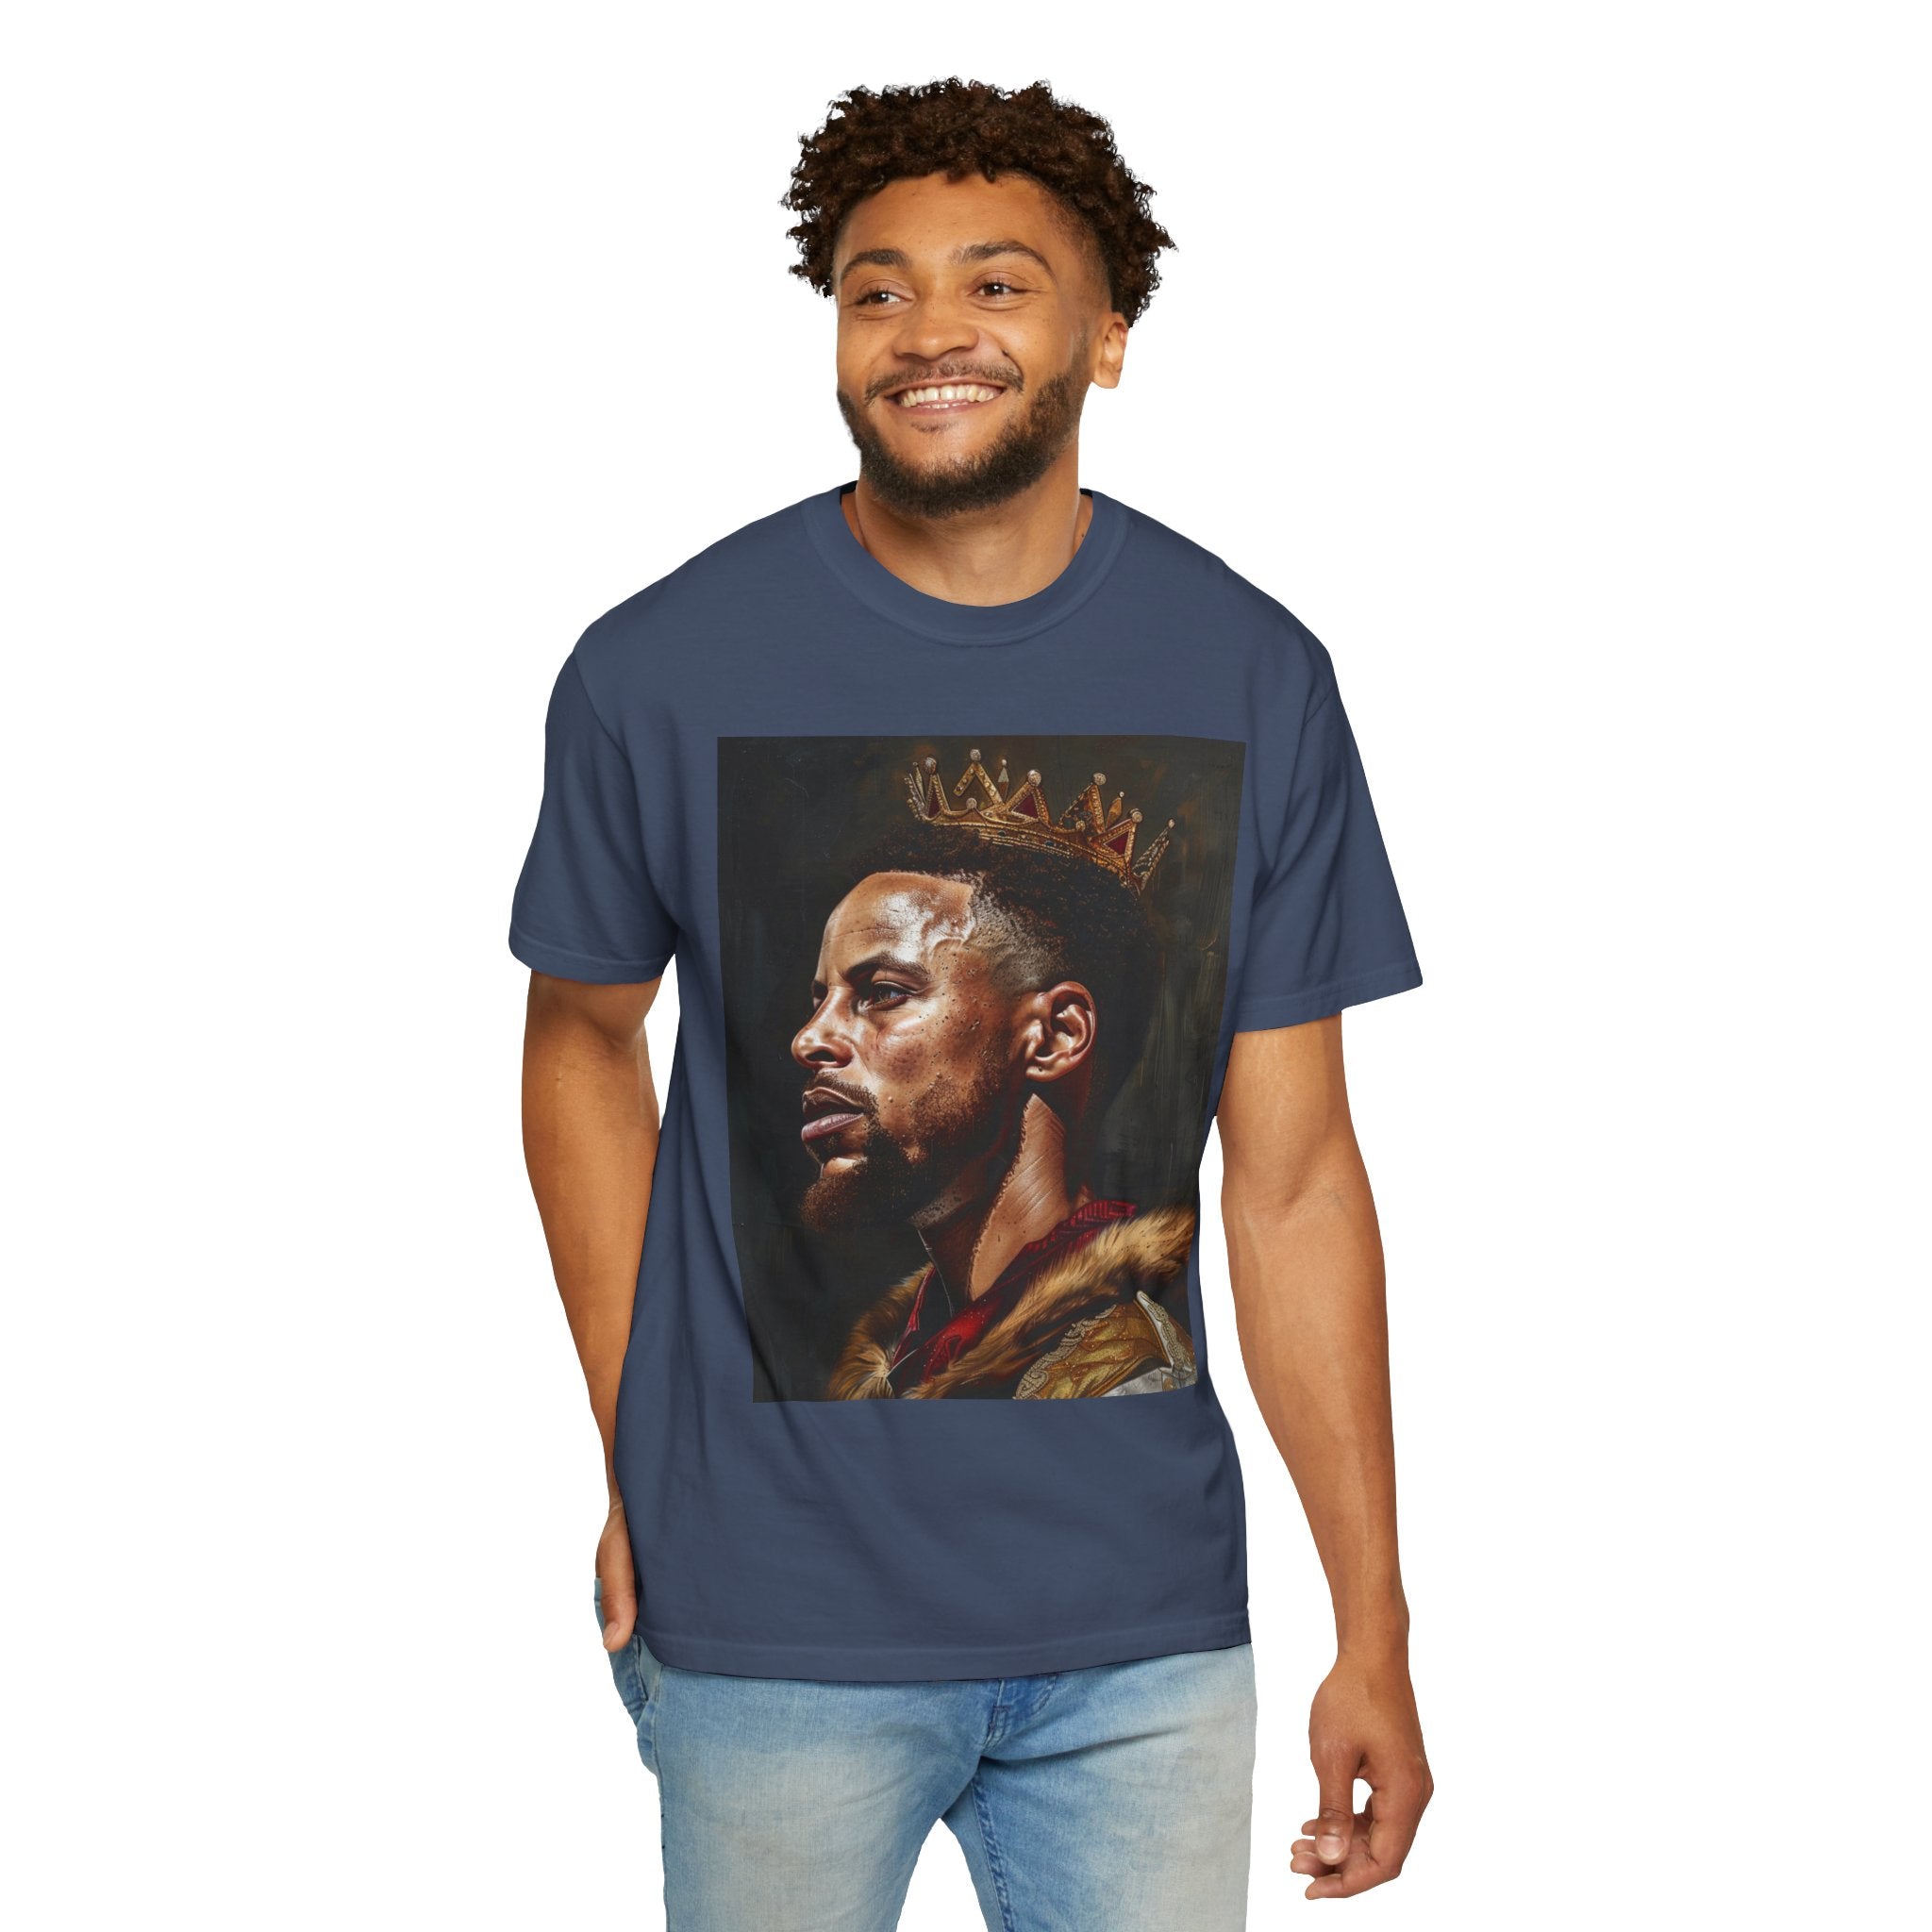 The image highlights the sophisticated and unique design of the unisex garment-dyed t-shirt, showcasing the detailed Renaissance-style painting of King Steph in action. The rich, garment-dyed colors set the perfect backdrop for the artwork, emphasizing the fusion of historical artistry and modern basketball culture.